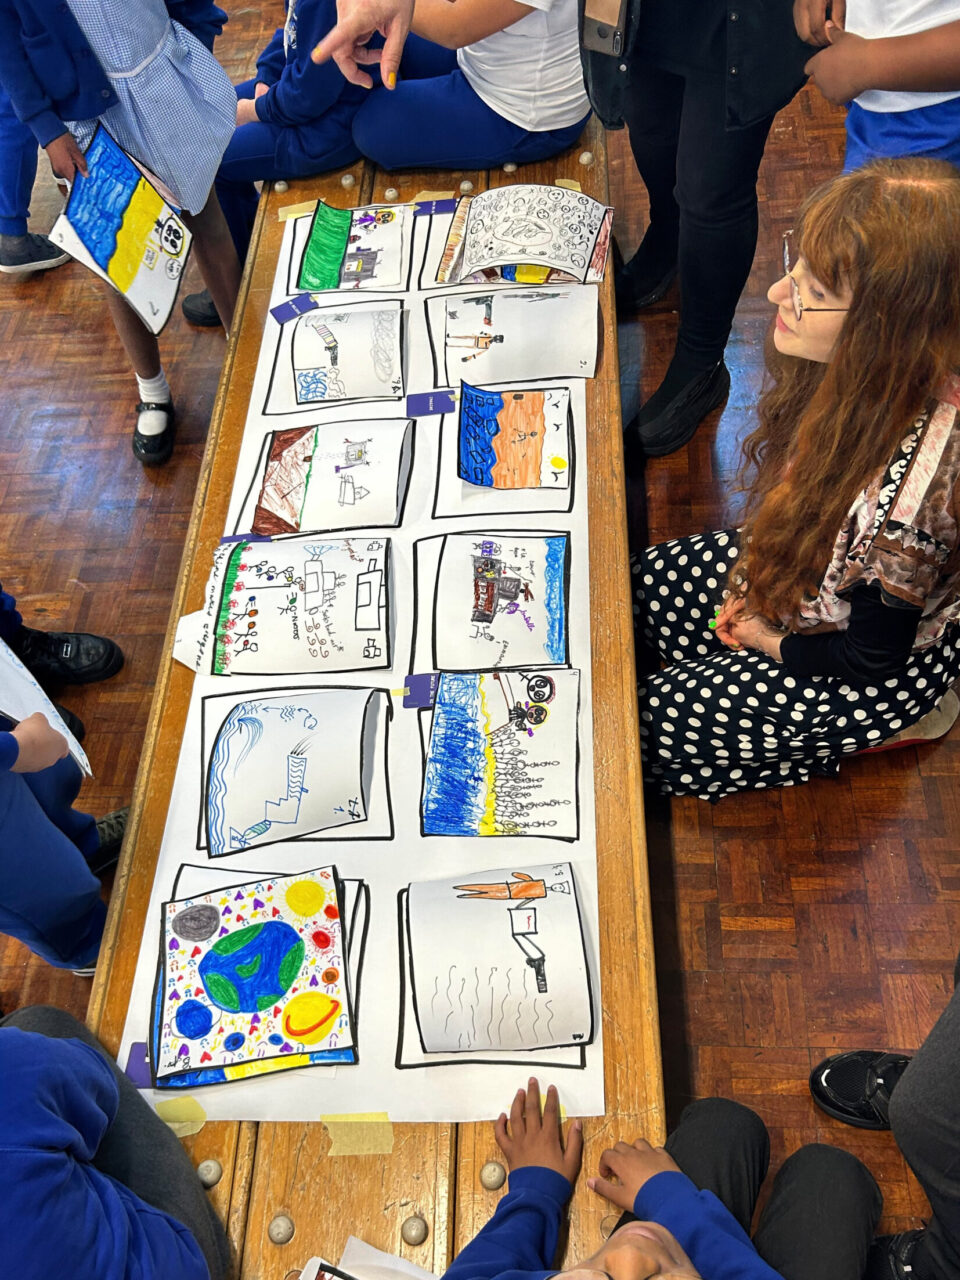 A group of children working with Stine and Aleks to create a story board out of their drawings.